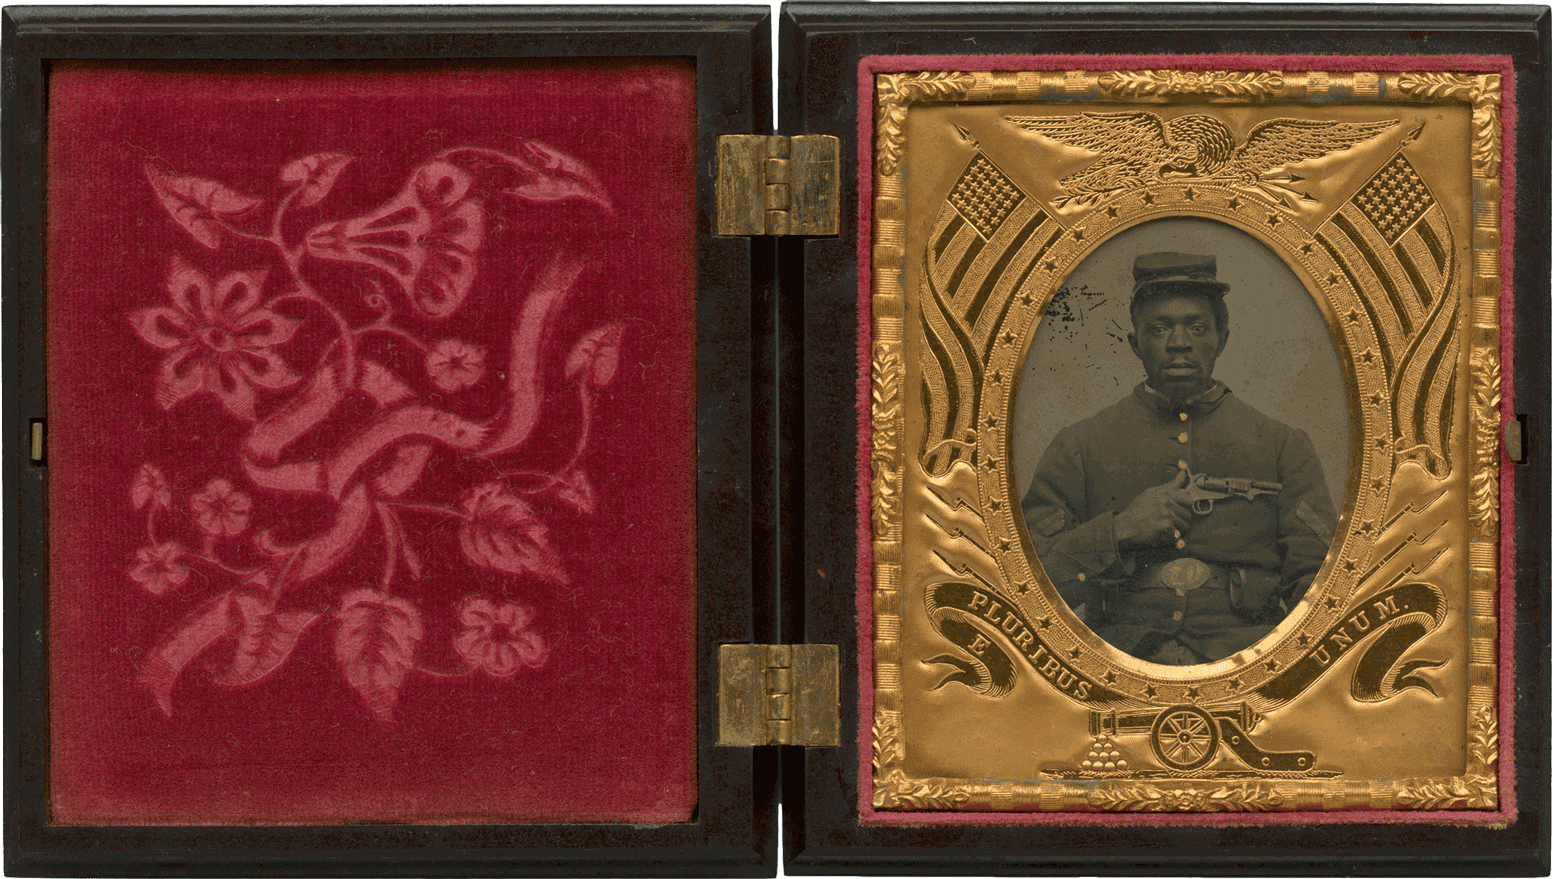 A tintype of a soldier with his portrait on the right hand side and a red velvet flower pattern on the right.